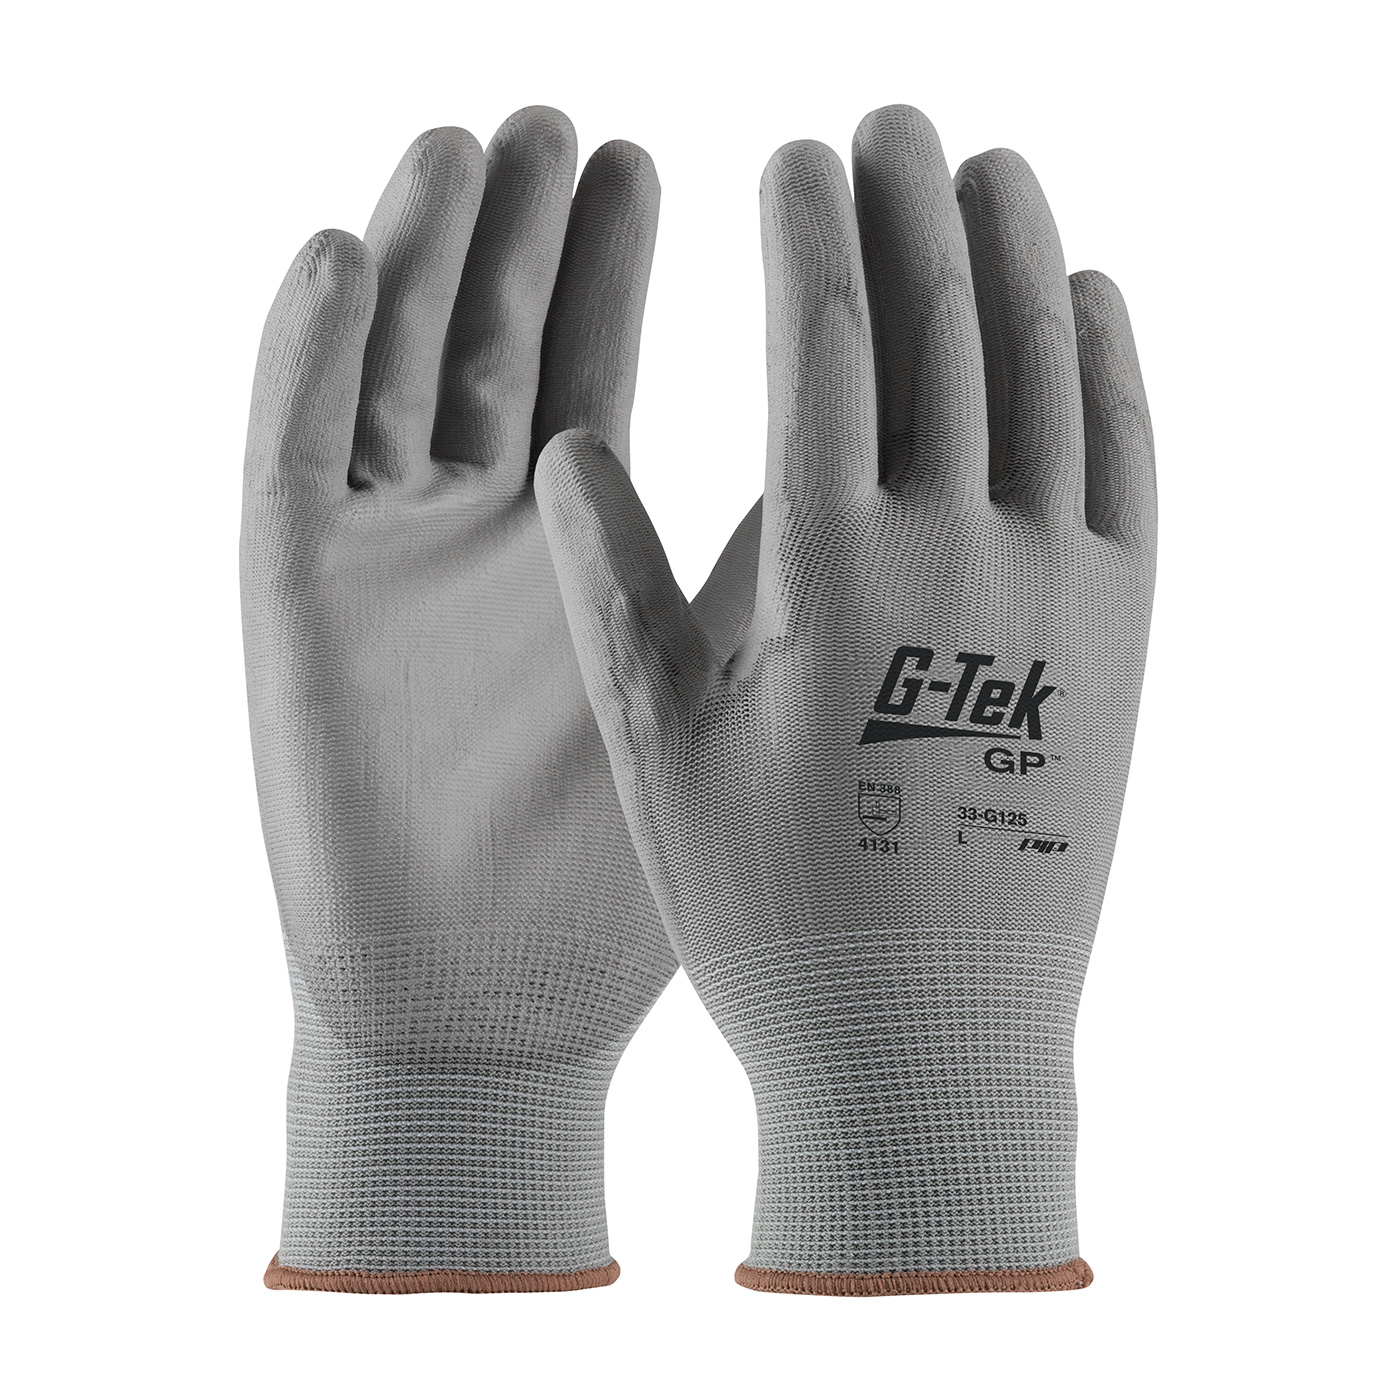 #33-G125 PIP® G-Tek® GP™ Seamless Knit Gray Nylon Glove with Gray Polyurethane Coated Smooth Grip on Palm & Fingers 